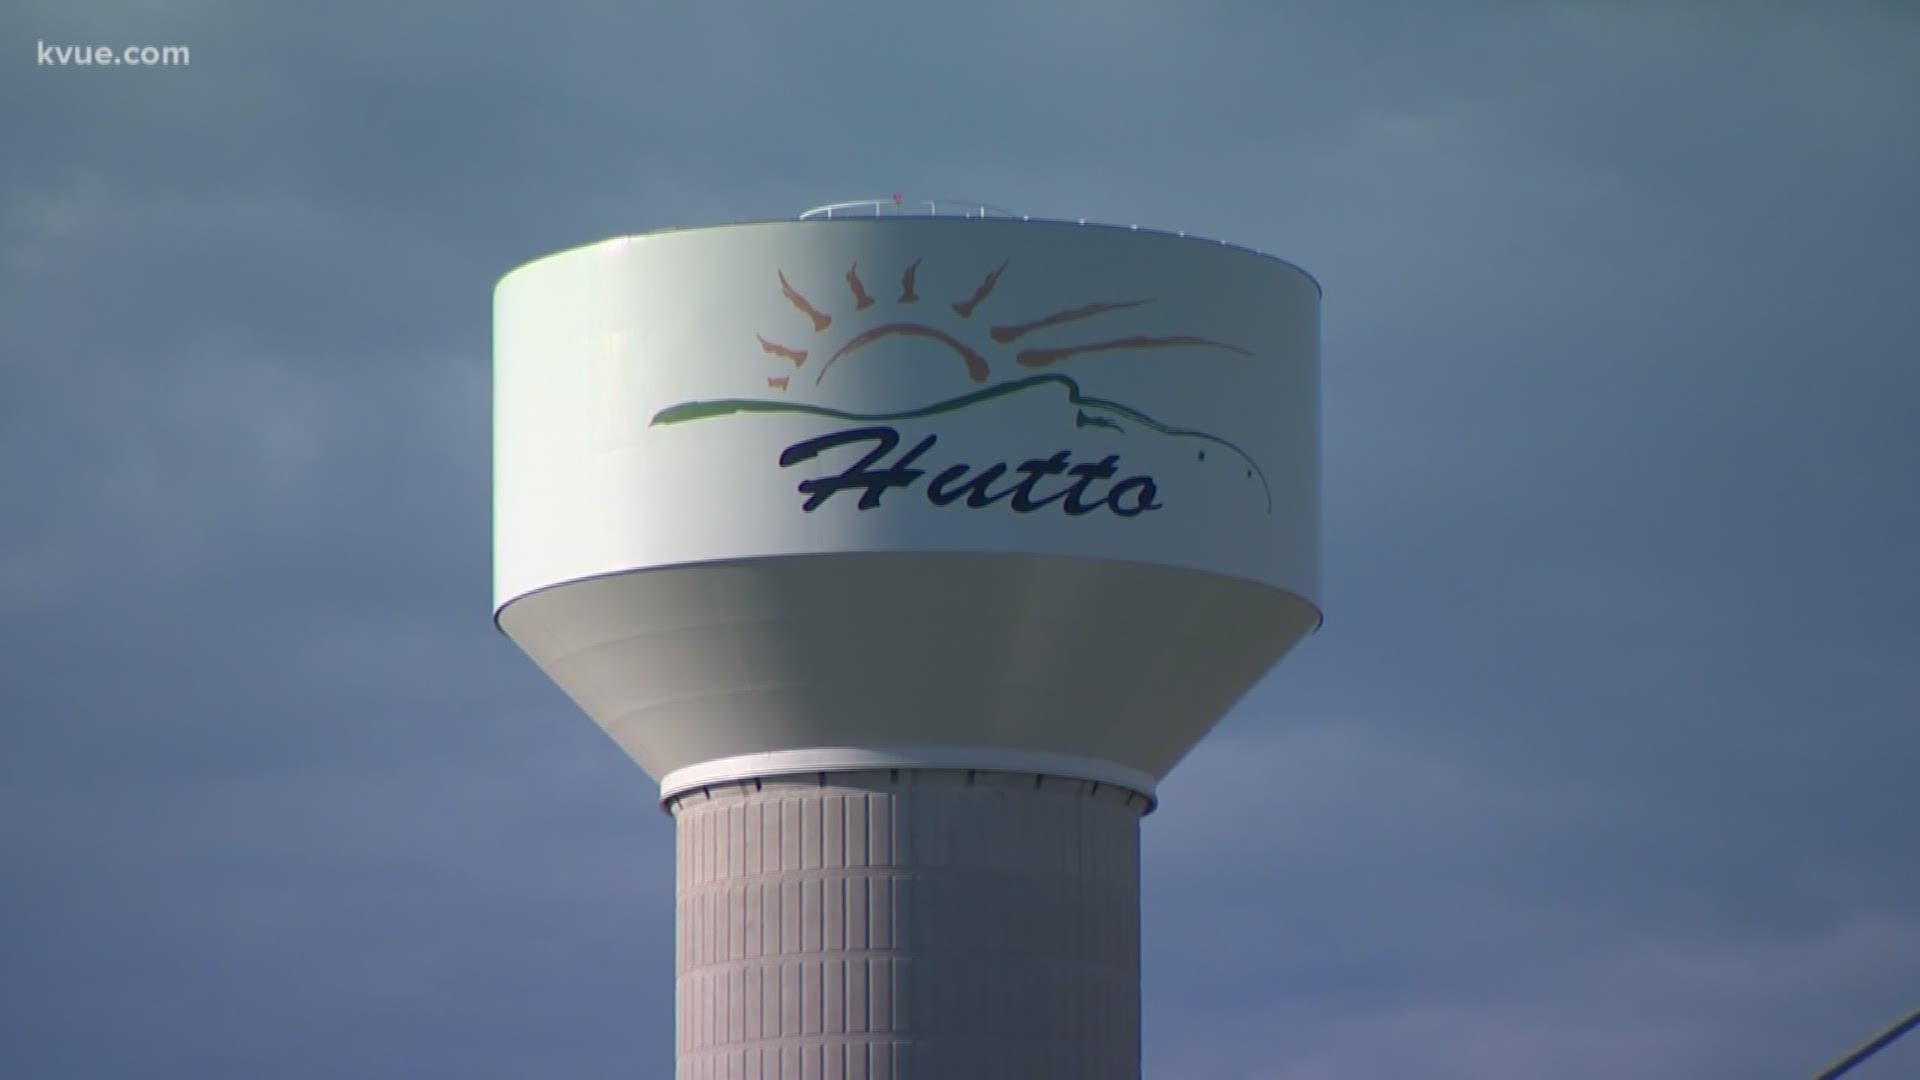 The City of Hutto issued a precautionary boil water notice Sunday, and it's still in effect more than 24 hours later.